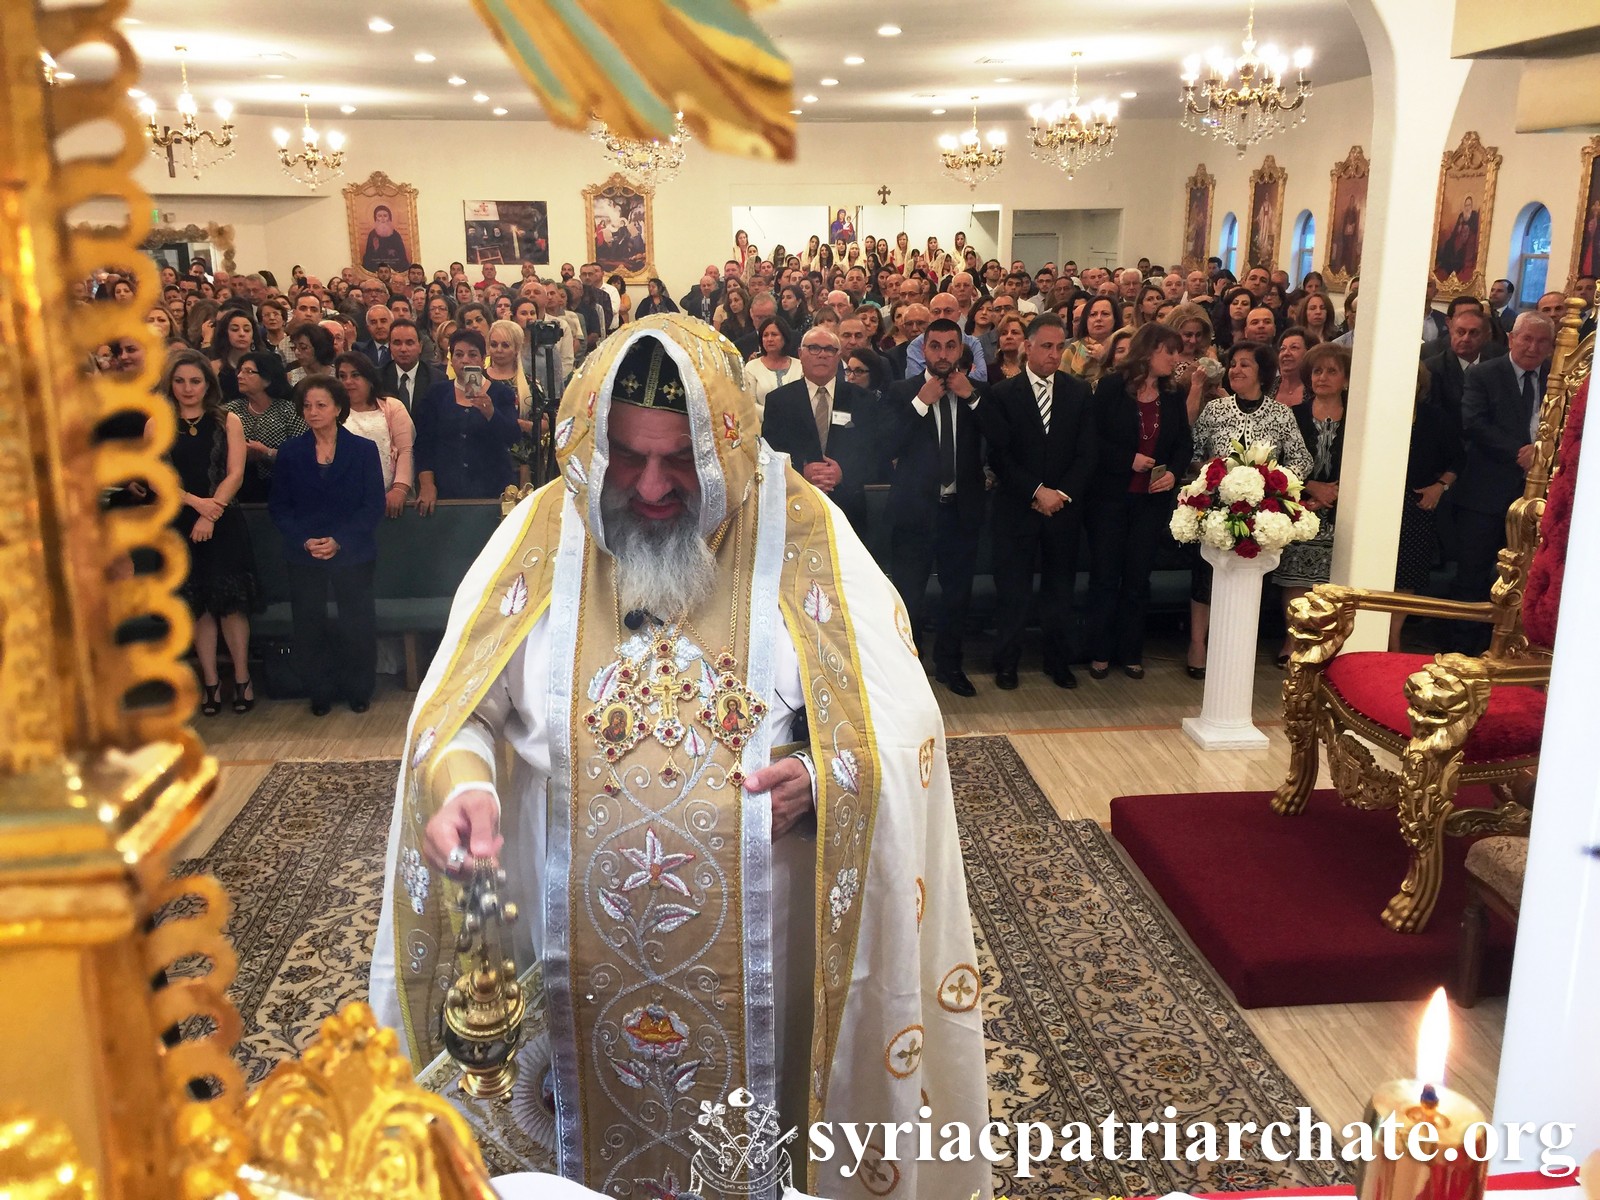 Consecration of St. Paul the Apostle Syriac Orthodox Church in San Diego